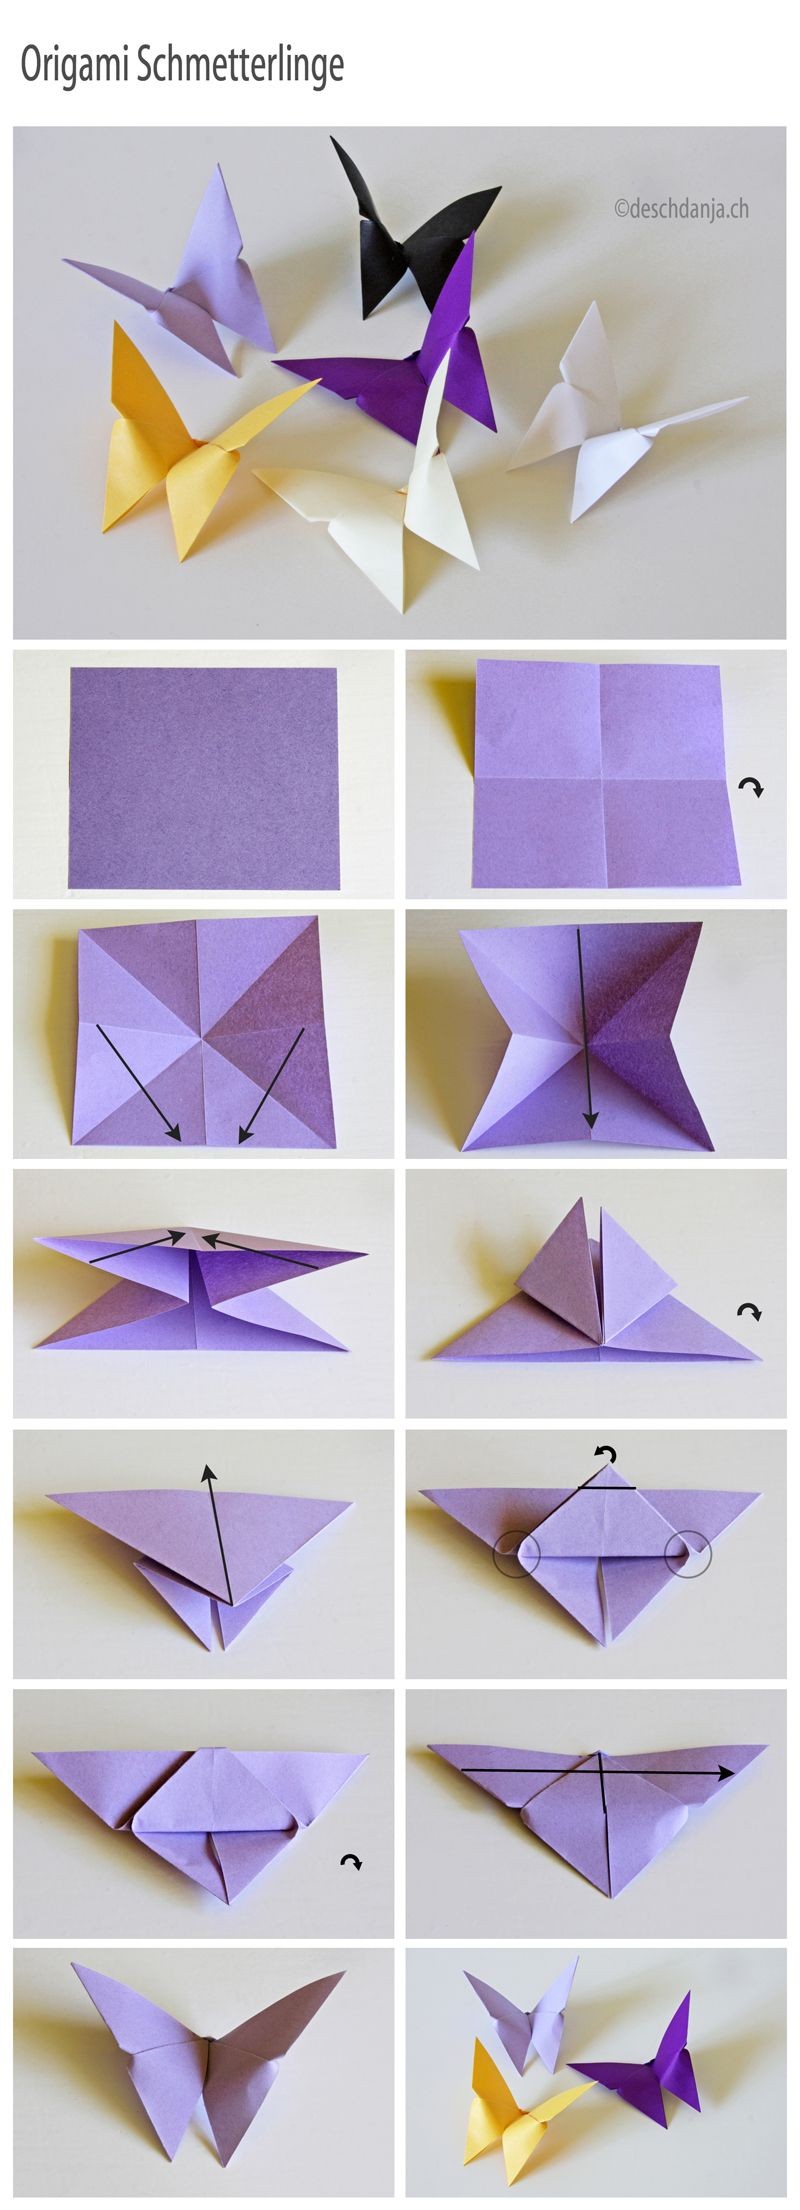 Papercraft Easy Easy Paper Craft Projects You Can Make with Kids